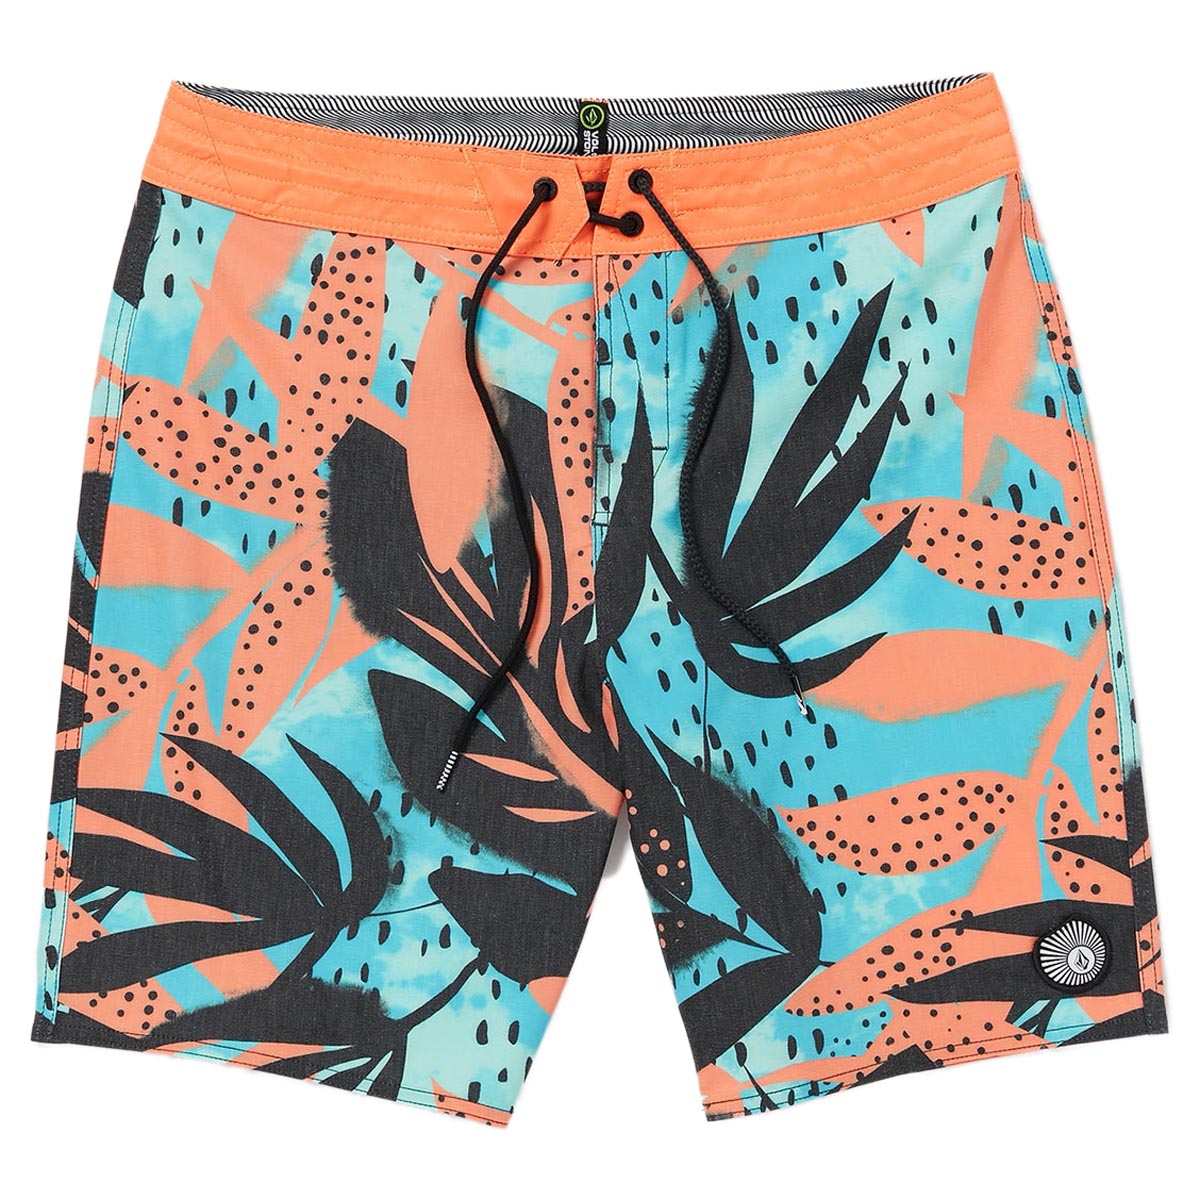 Volcom Waterside Floral Stoney 19 Board Shorts - Tigerlily image 1